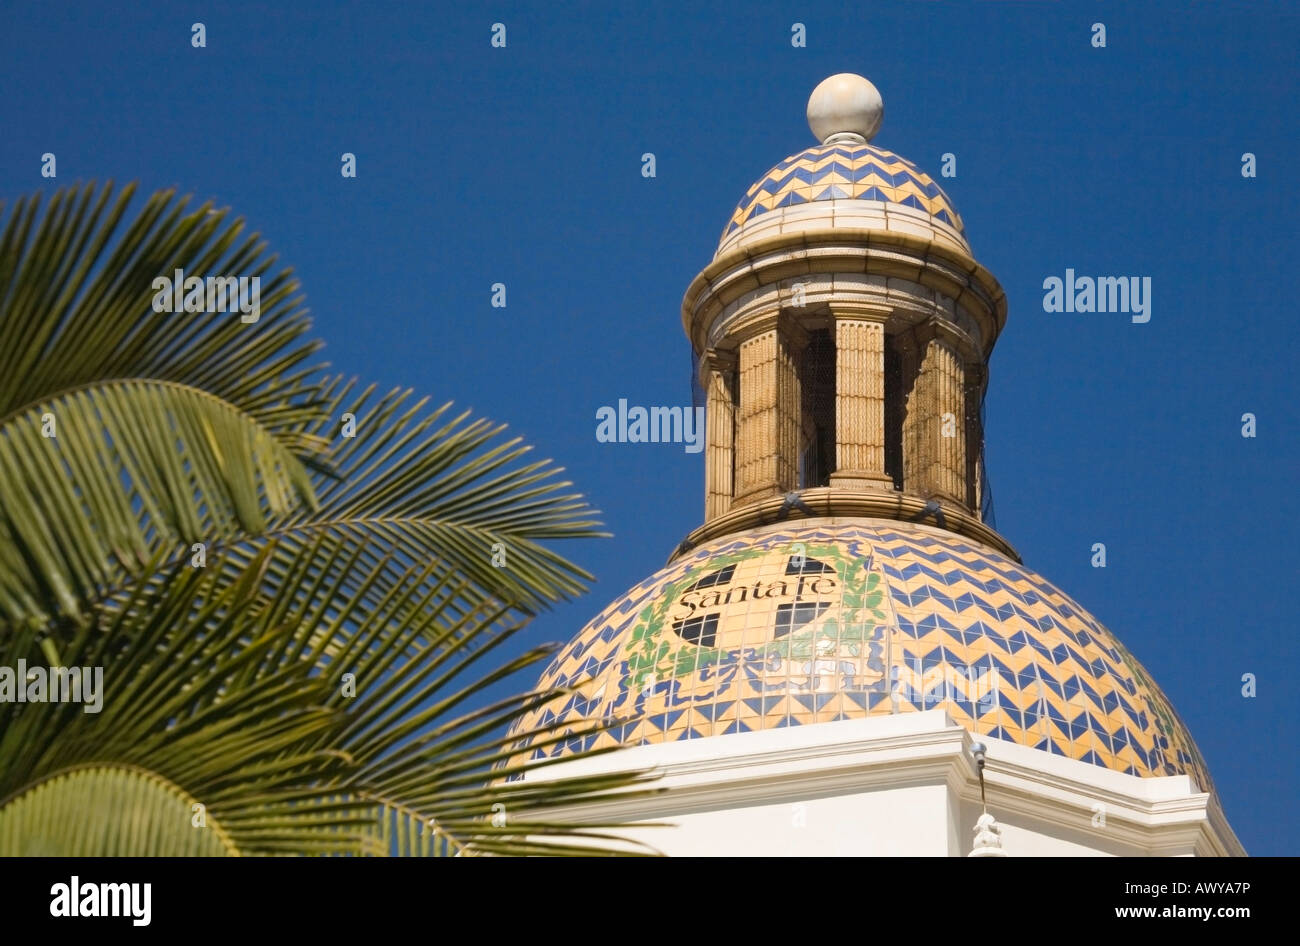 The colorful tiled dome of the Santa Fe railroad station in San Diego, California, showing Moorish influence in the architecture Stock Photo